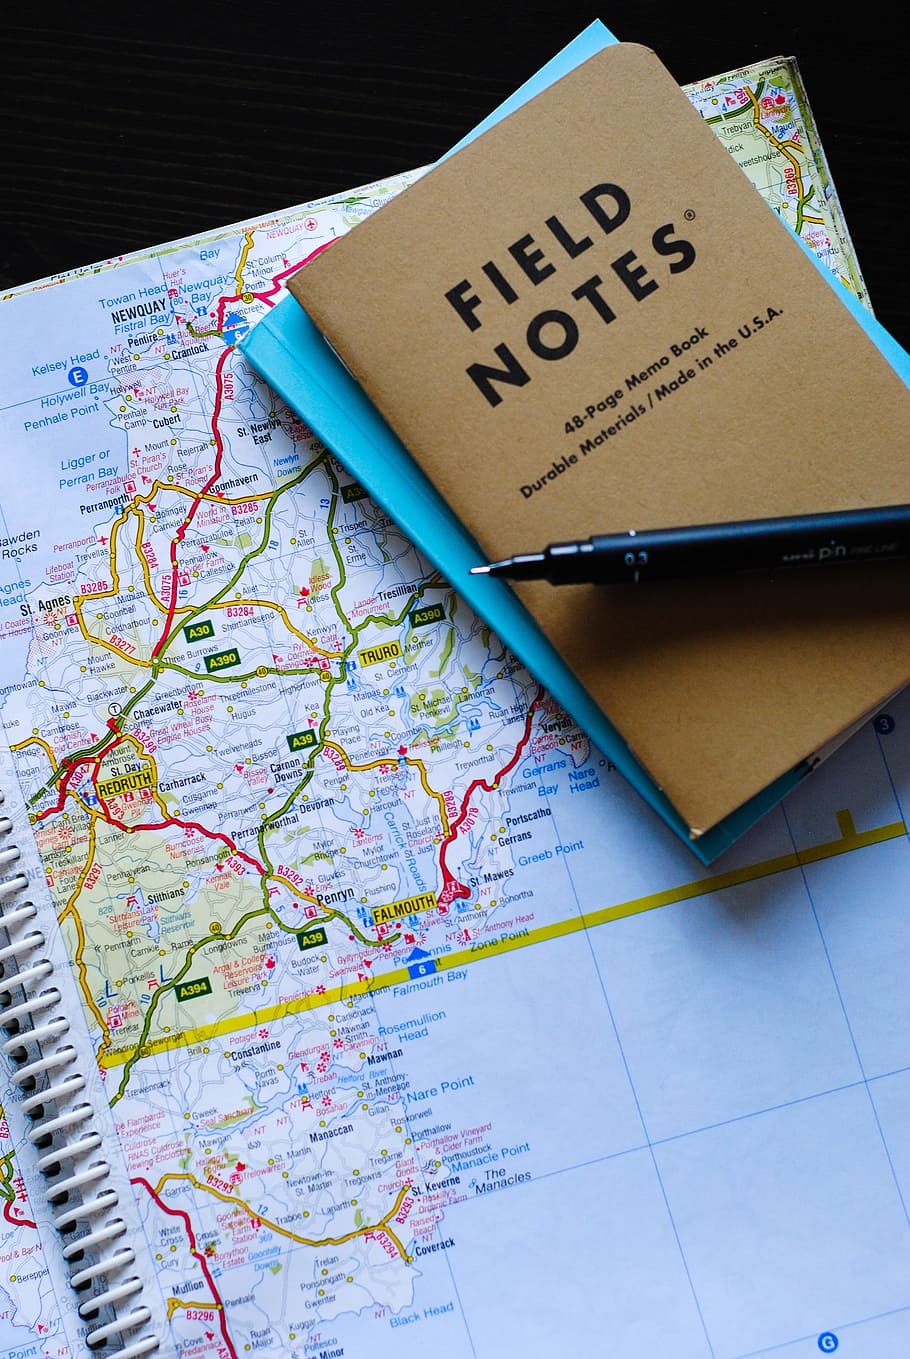 black gel pen on Field Notes book, map, directions, write, stationery